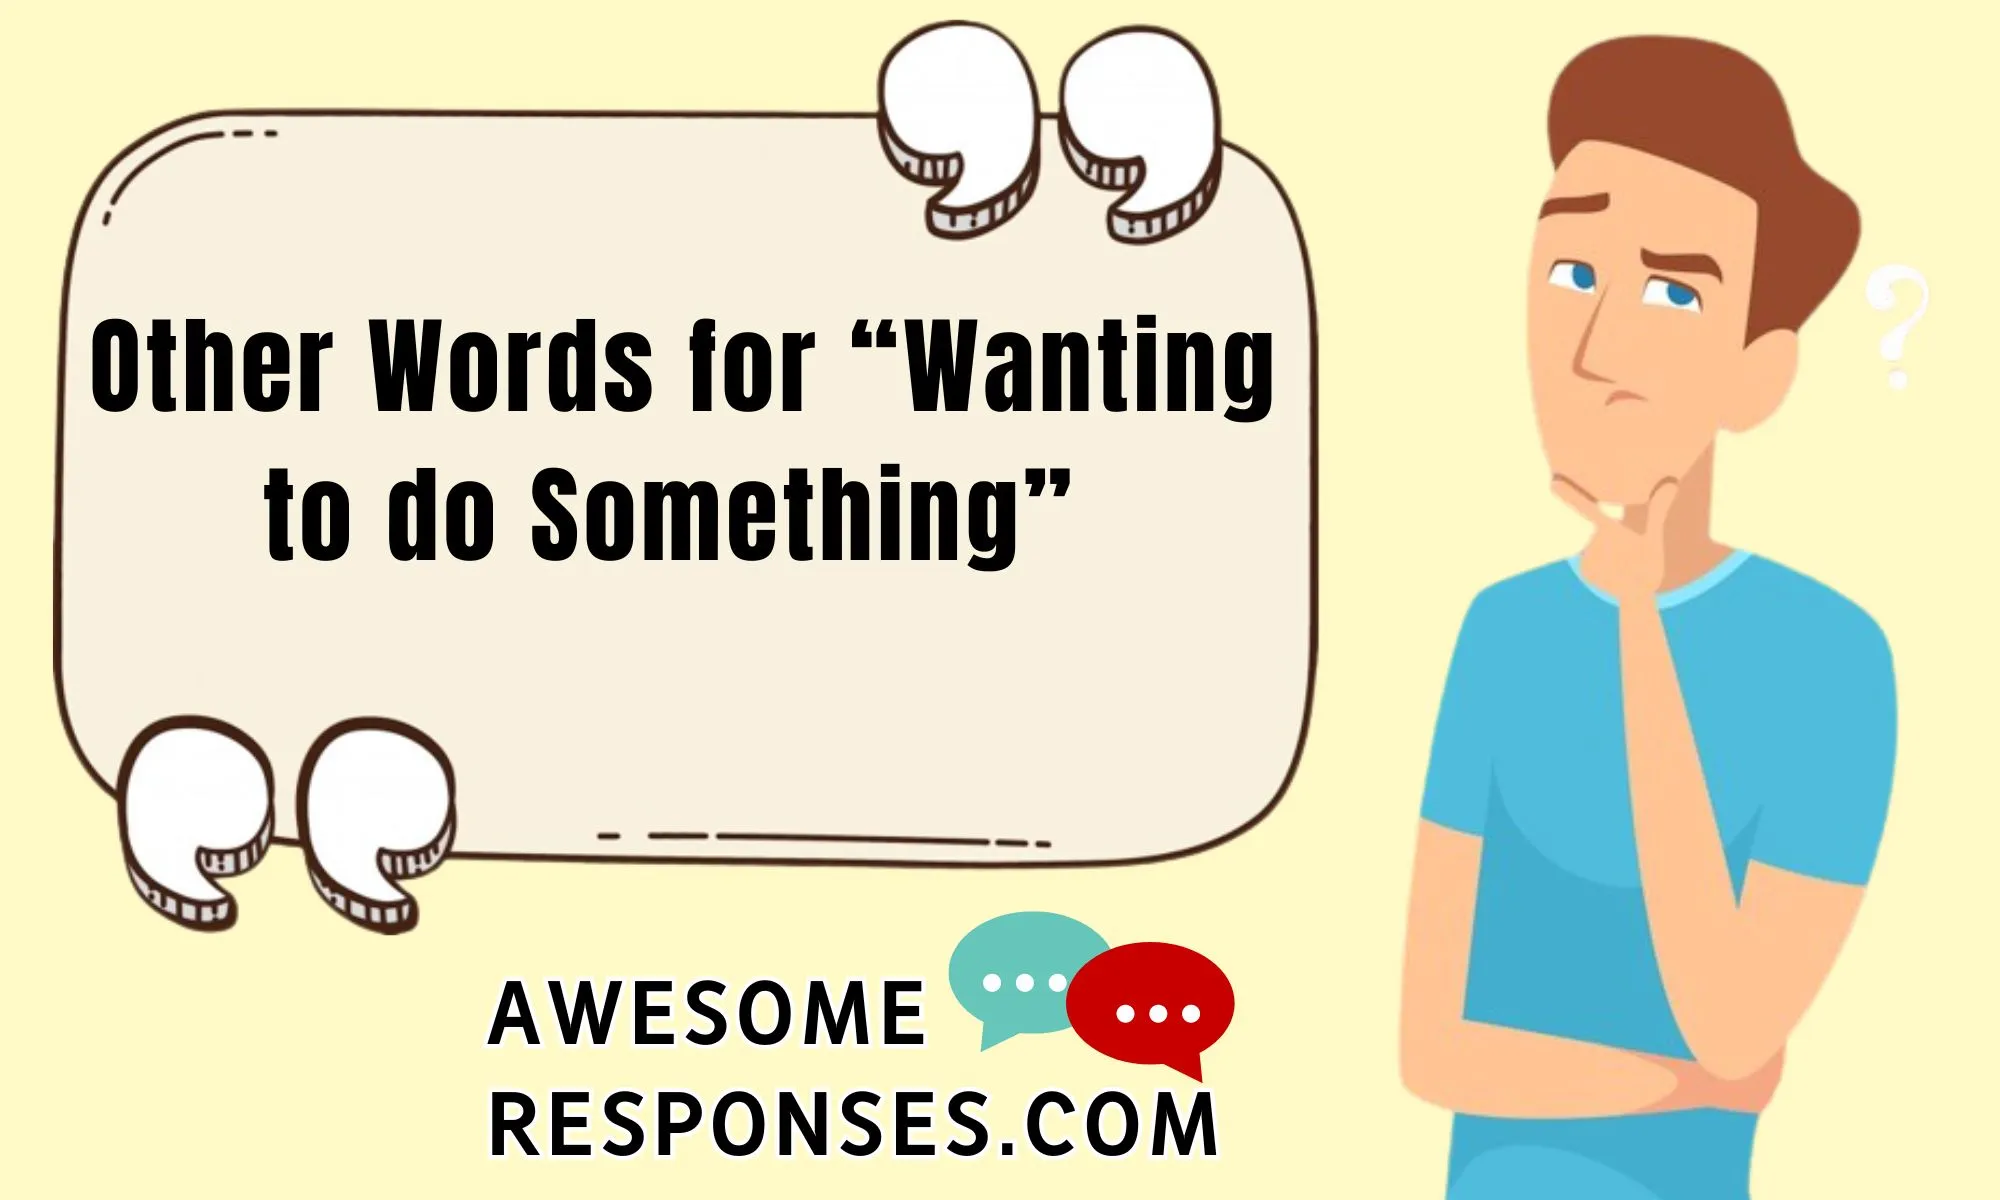 Other Words for “Wanting to do Something”